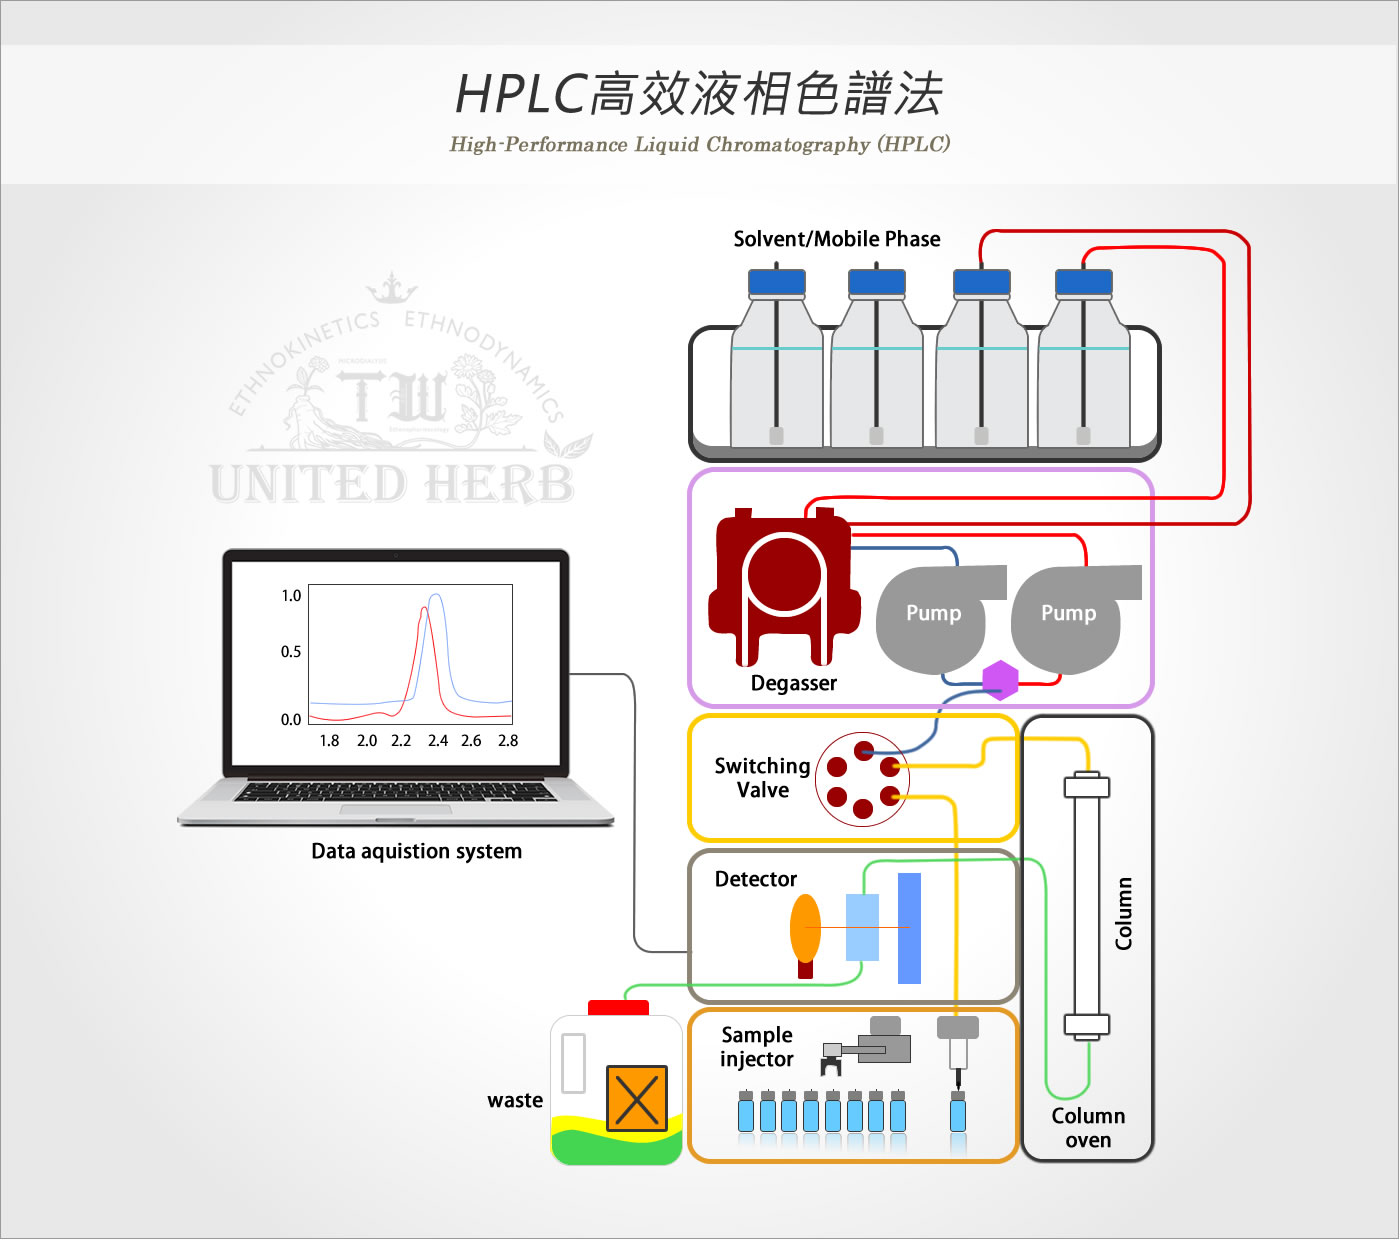 content about united hreb HPLC